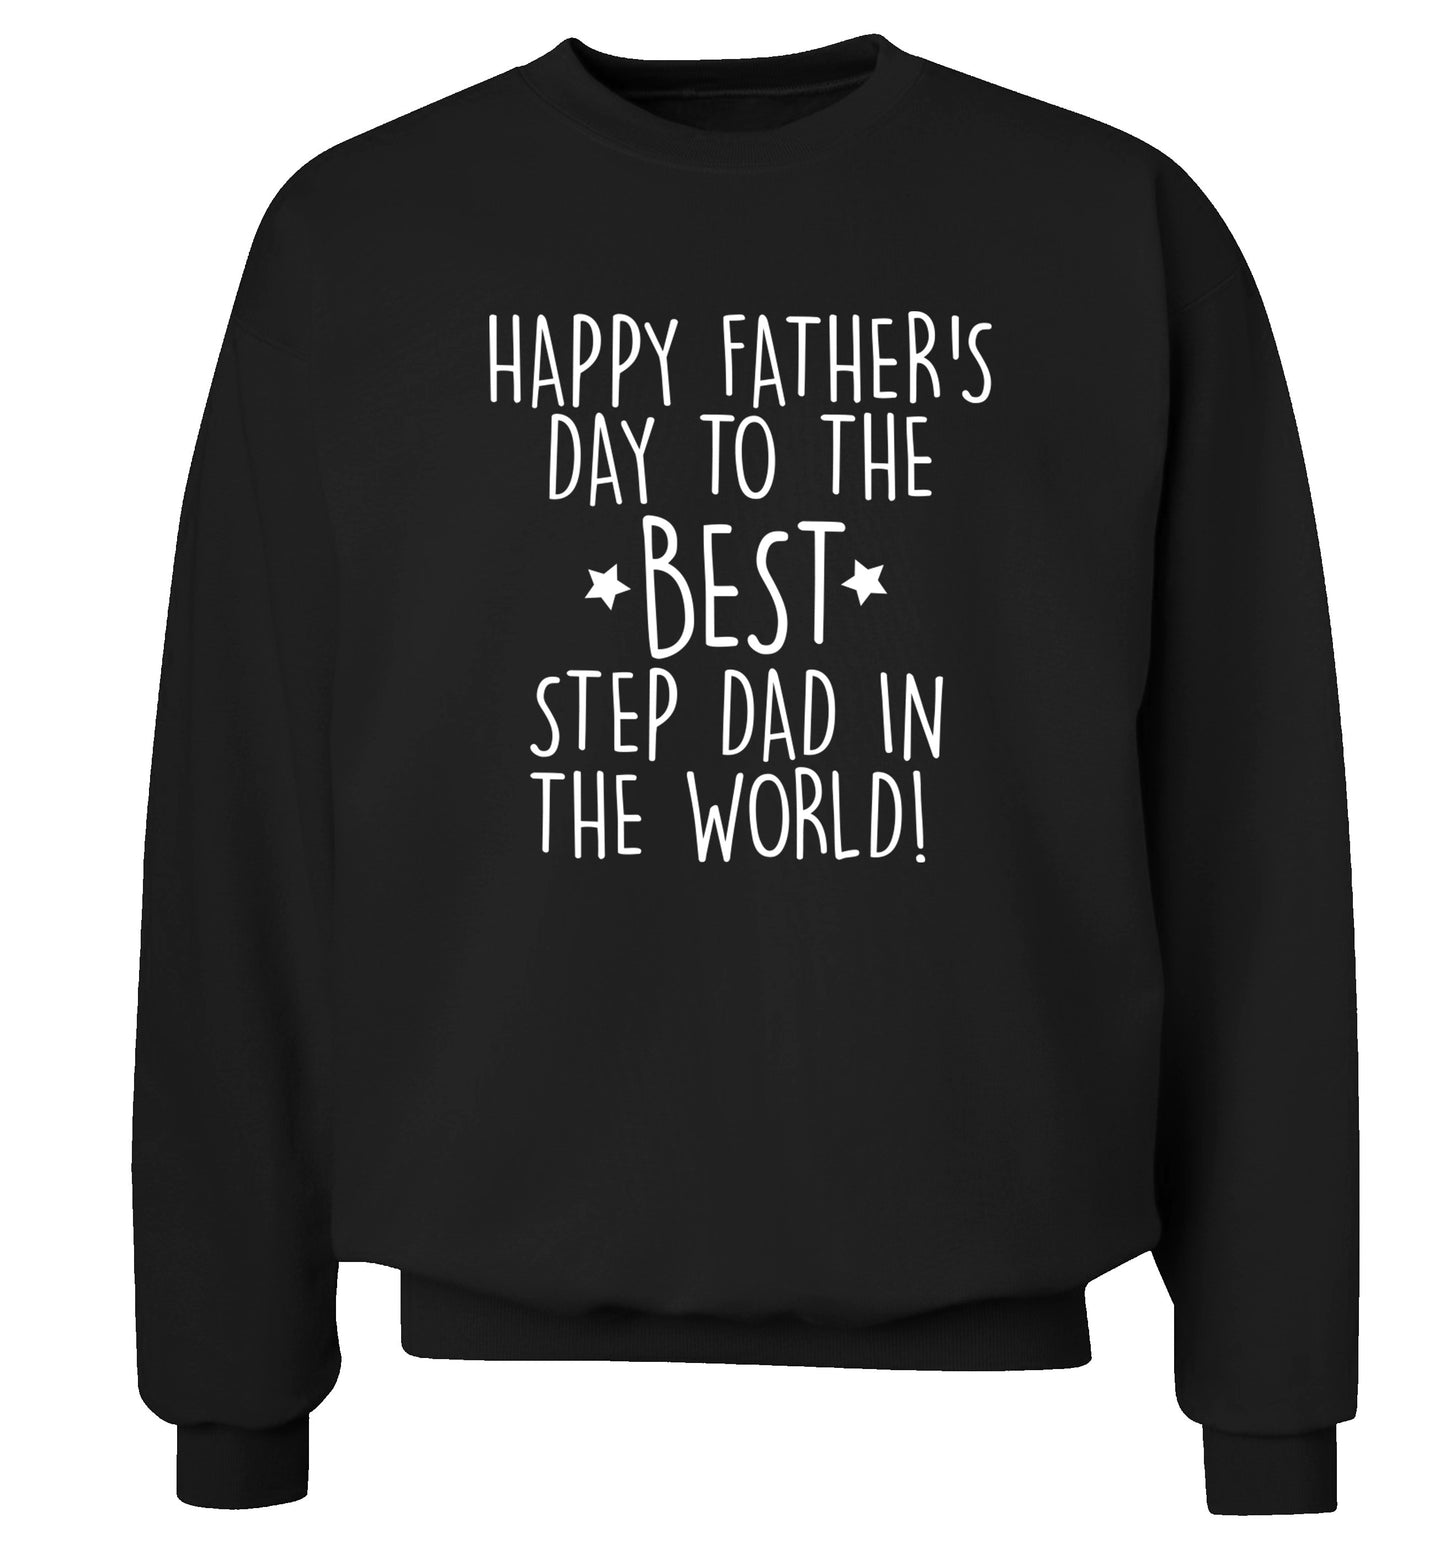 Happy Father's day to the best step dad in the world! Adult's unisex black Sweater 2XL